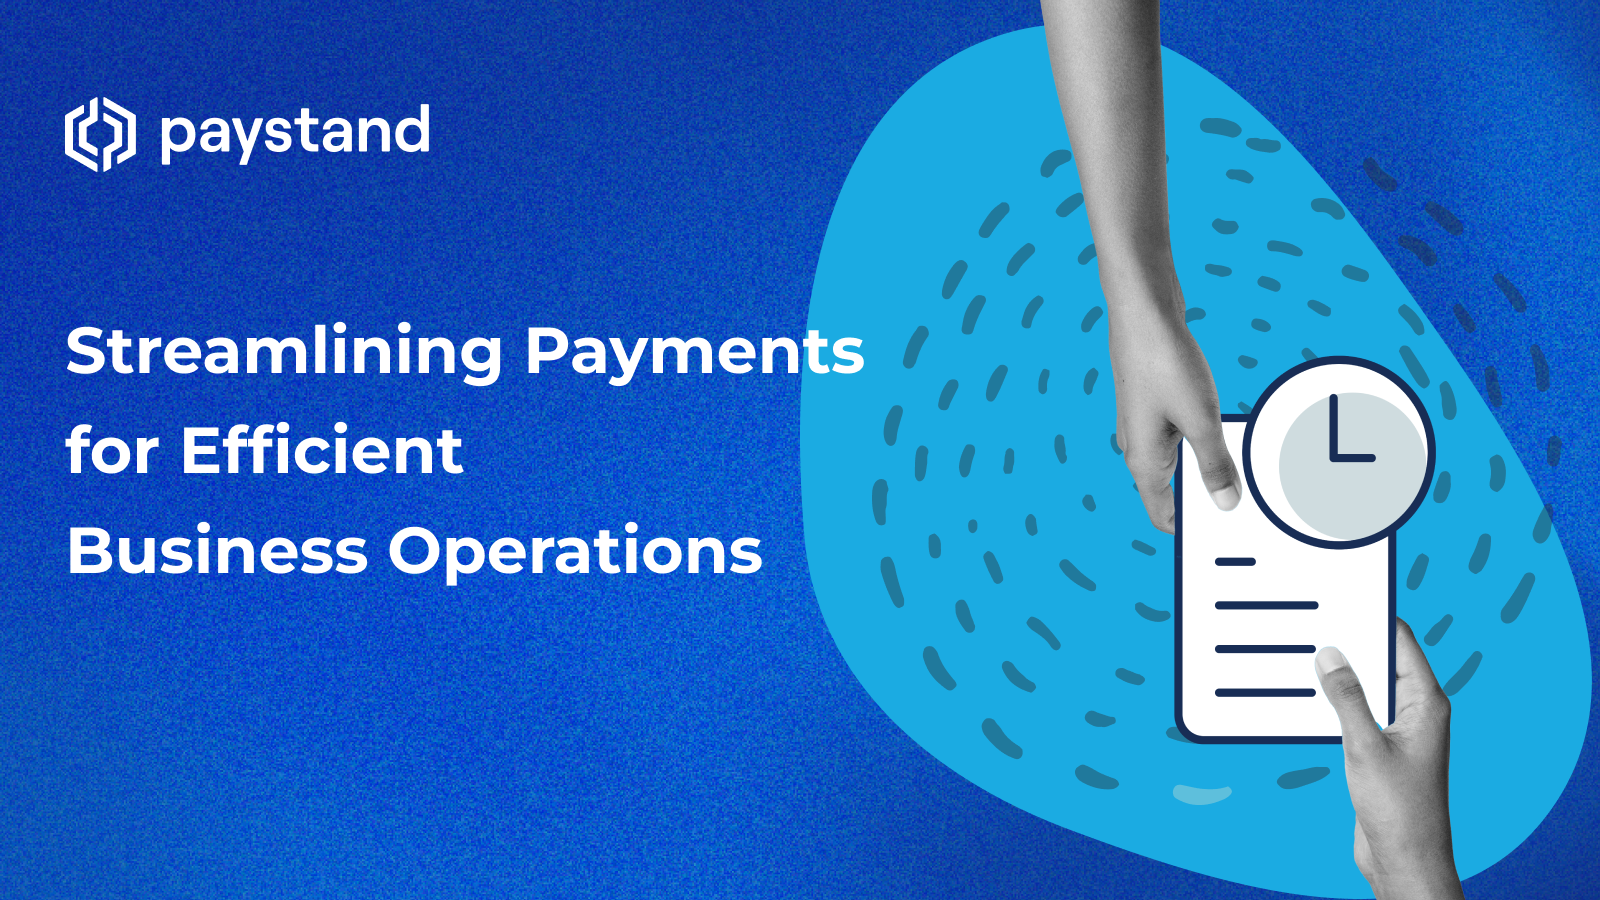 Streamlining Payments for Efficient Business Operations